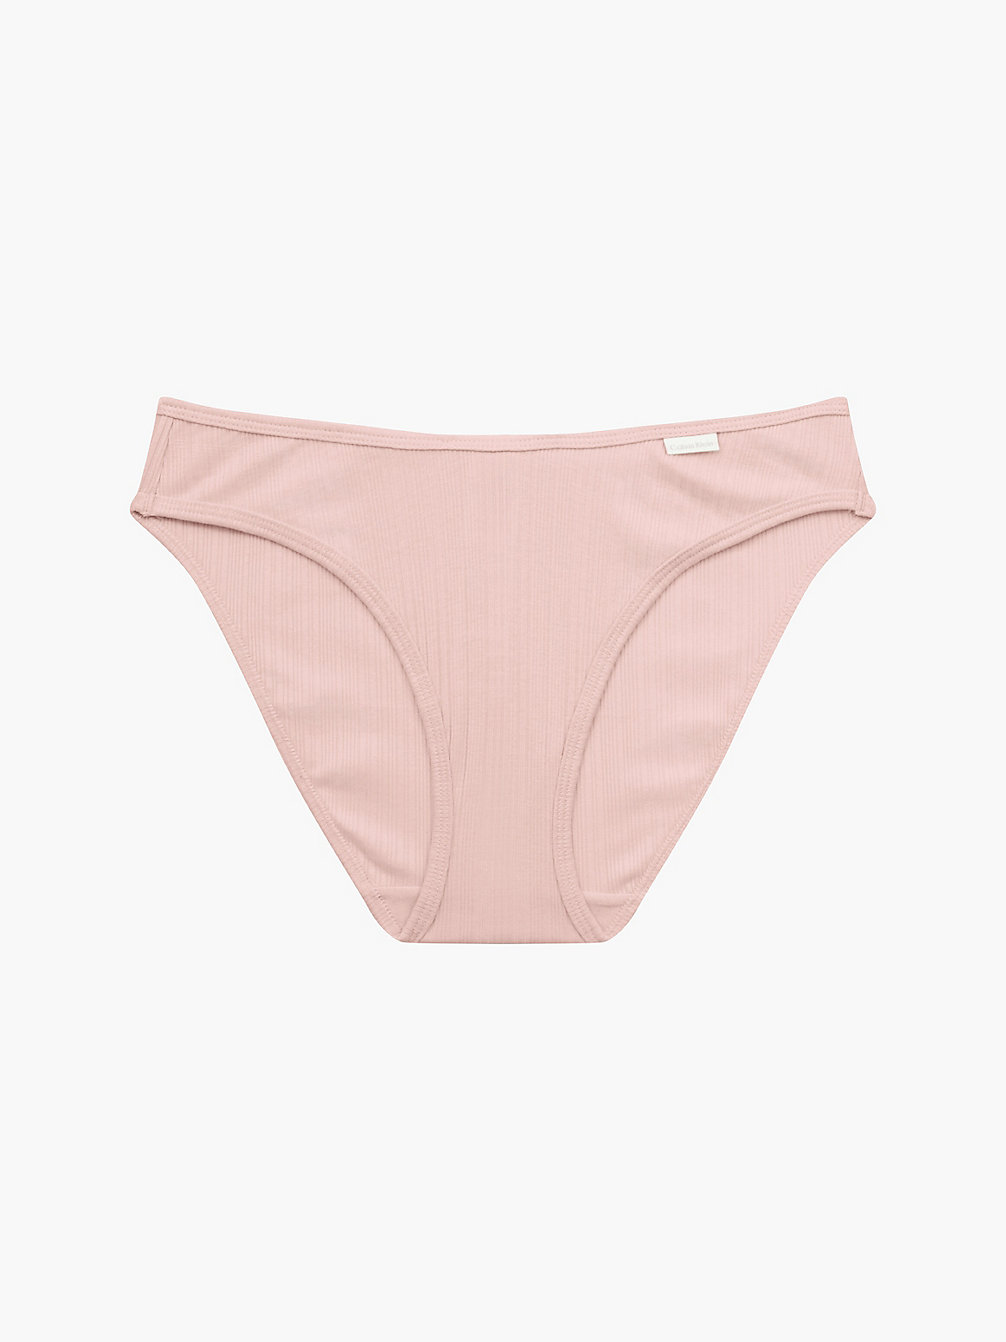 Culotte - Pure Ribbed > BARELY PINK > undefined femmes > Calvin Klein